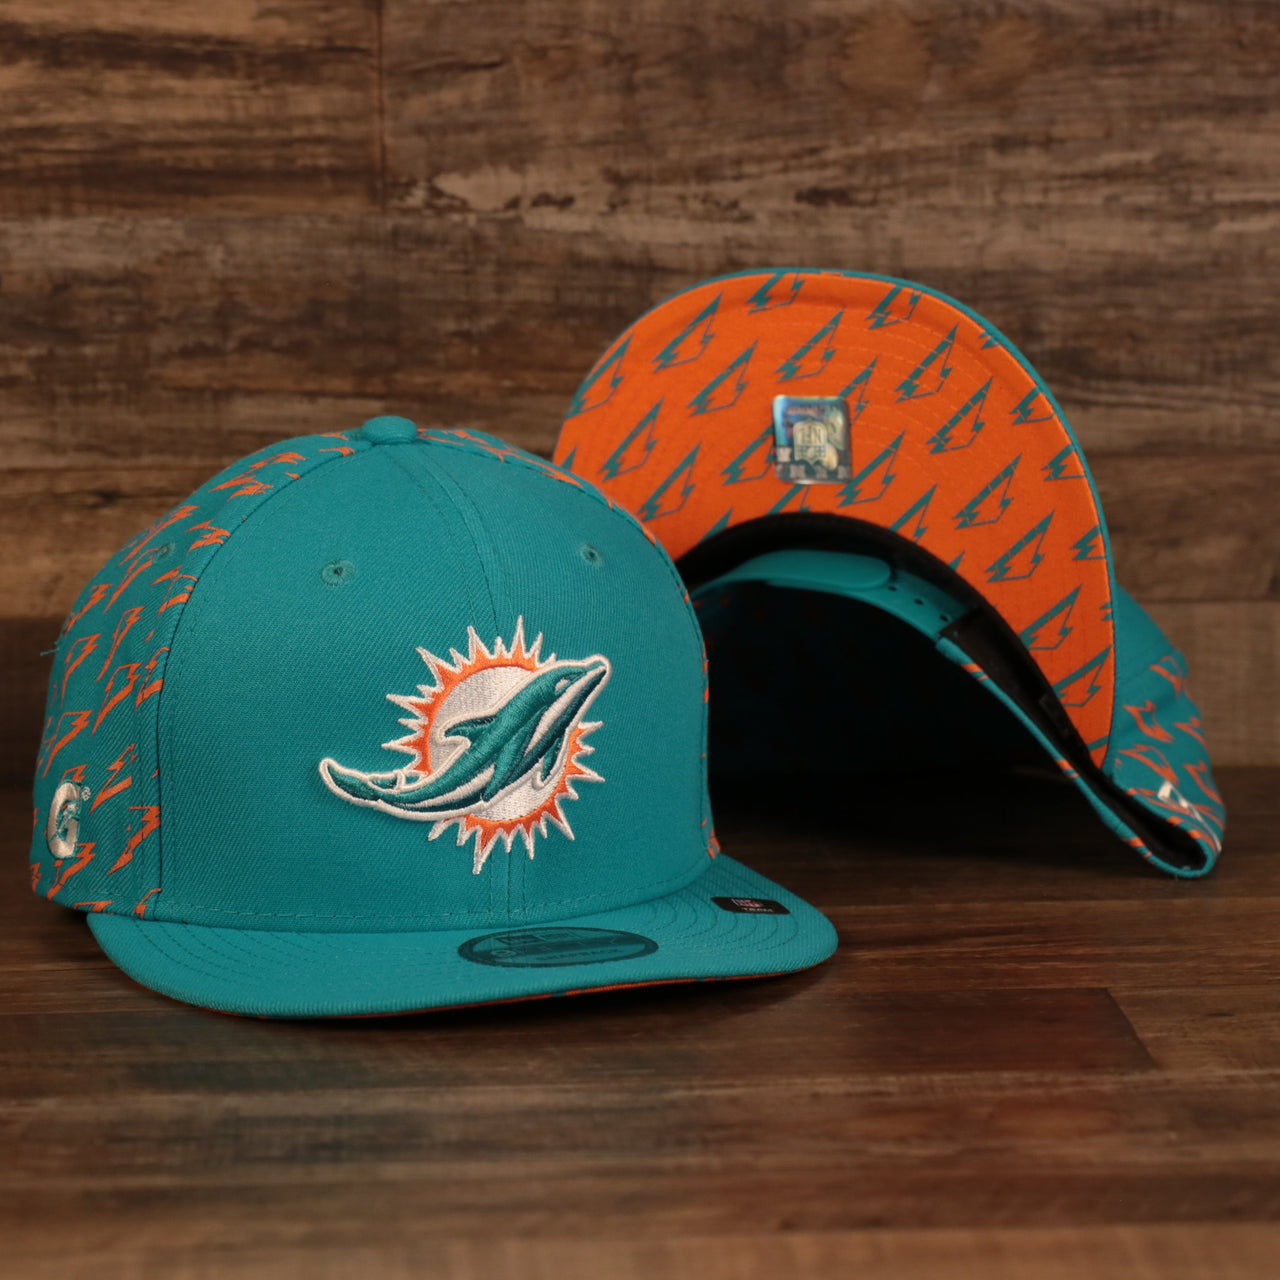 front and bottom of the Miami Dolphins x Gatorade Red 9Fifty Grey Bottom Snapback